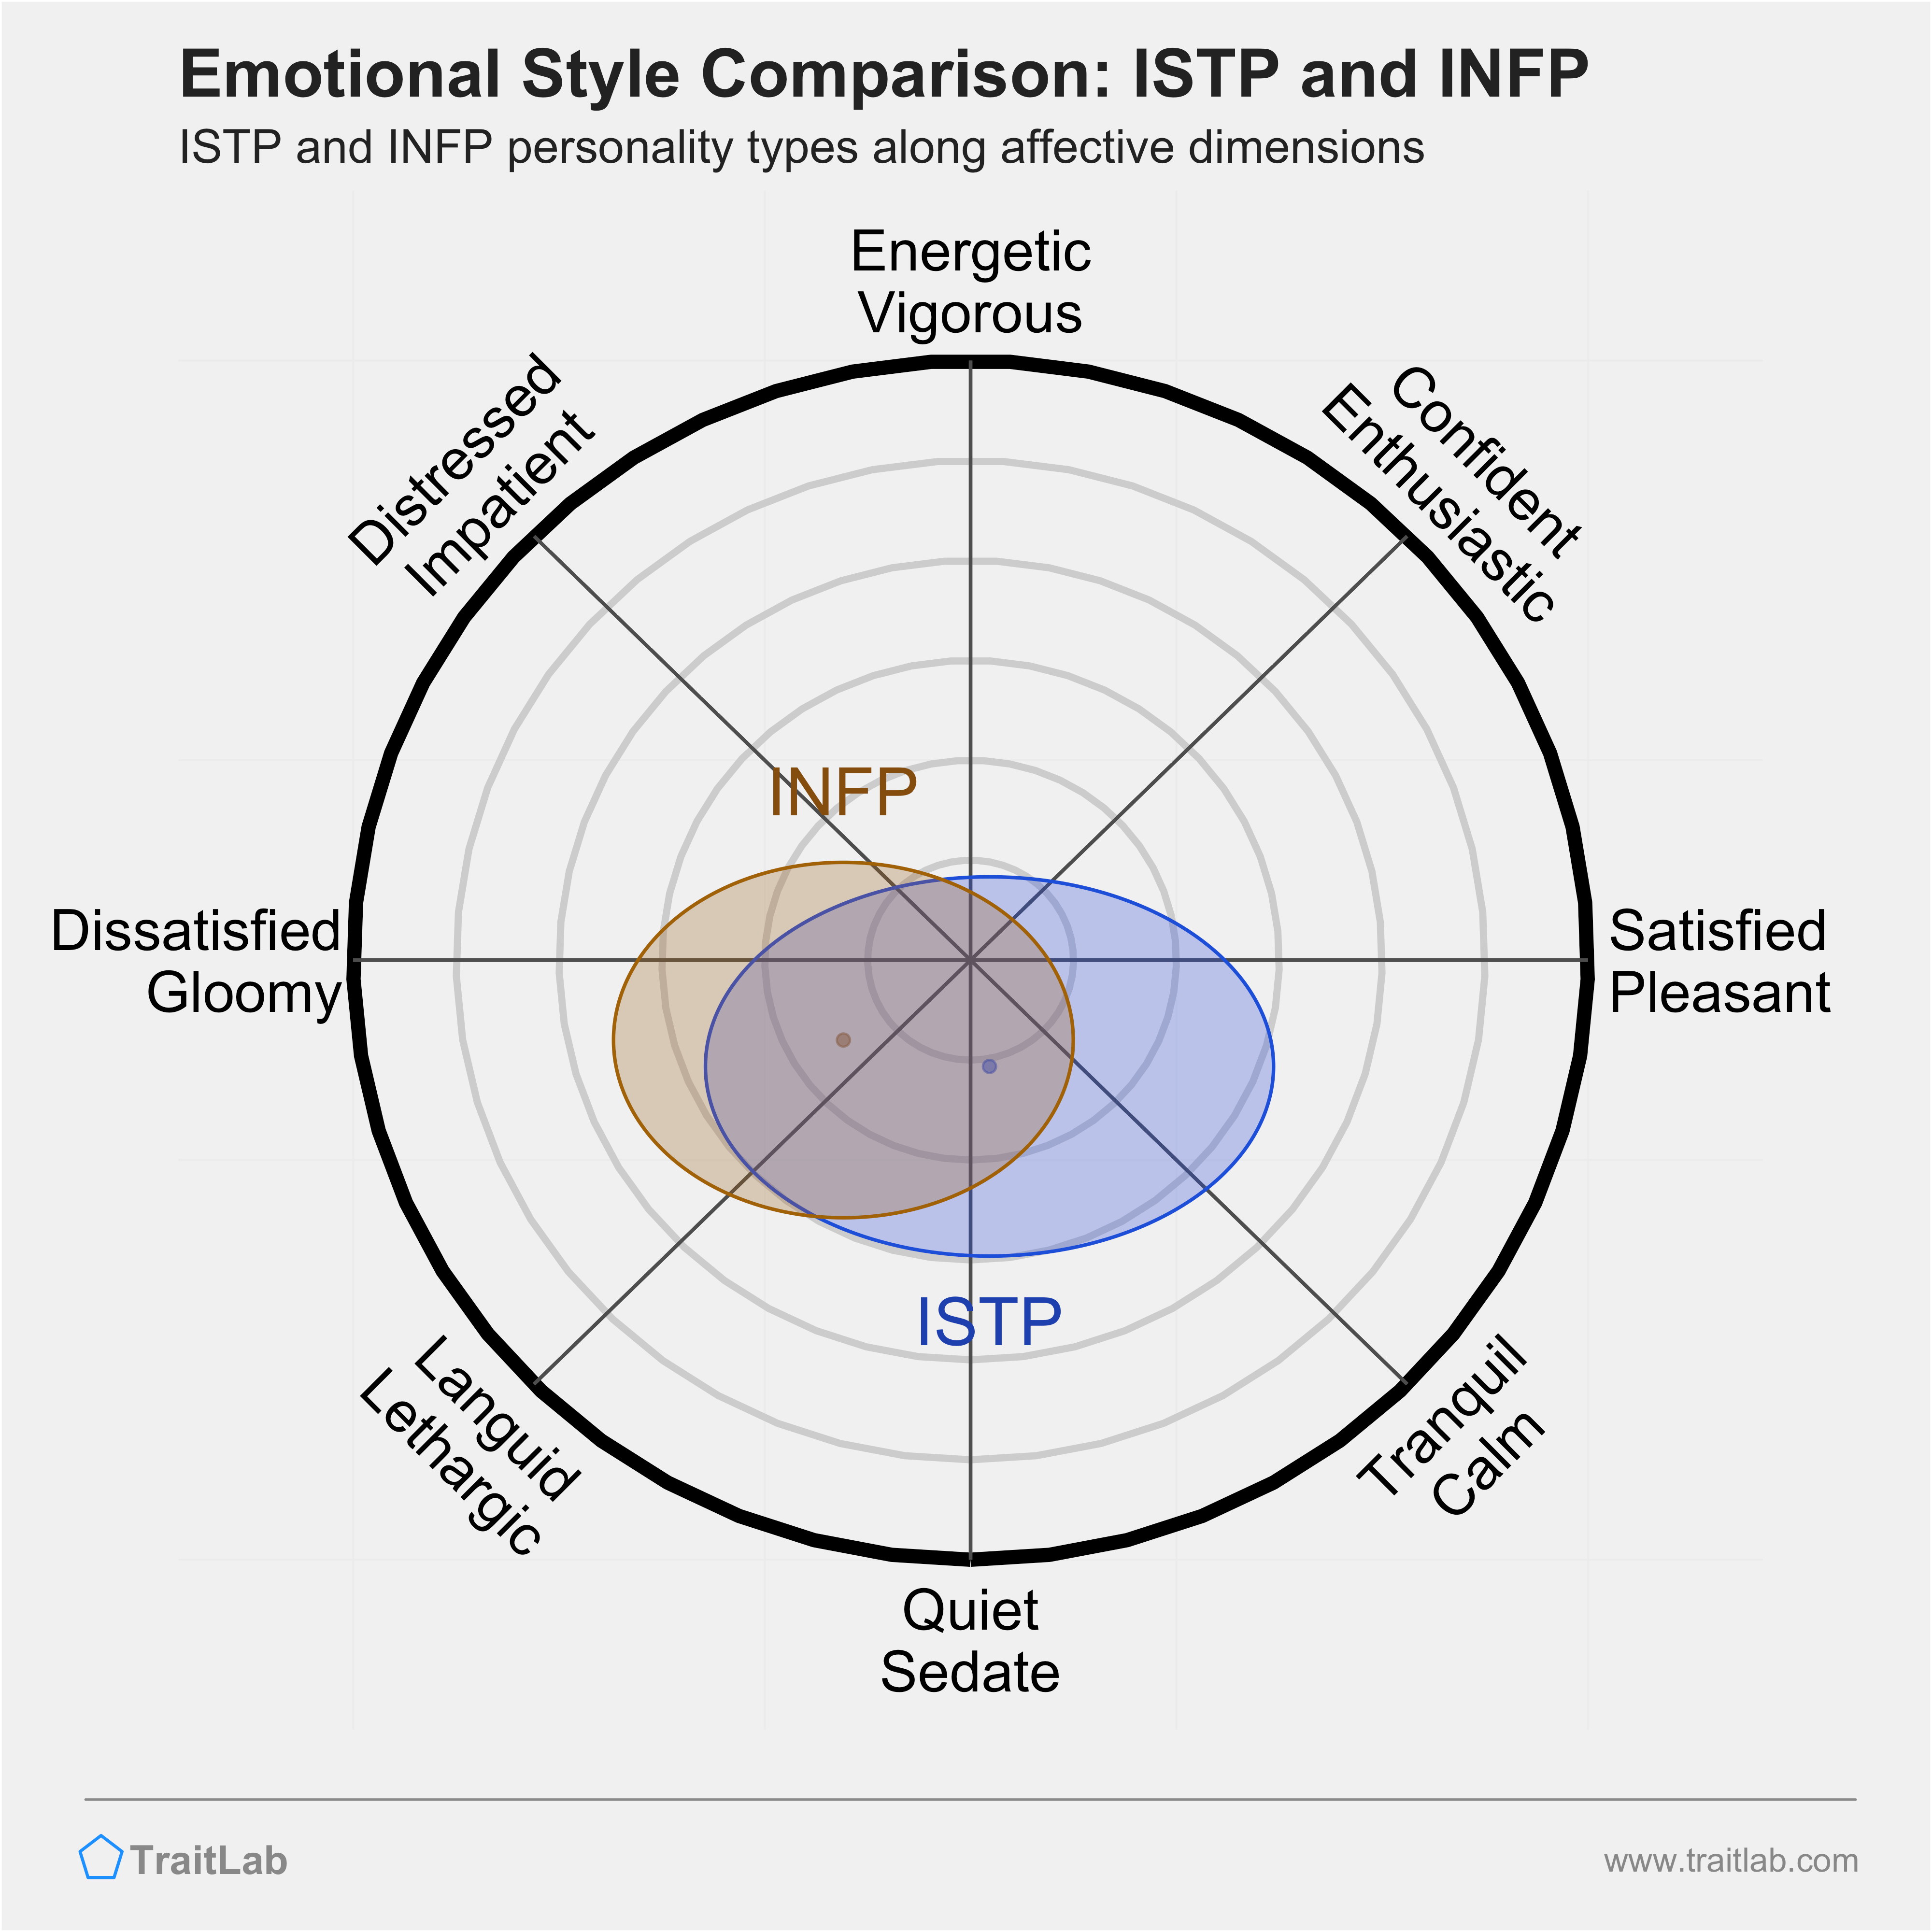 ISTP and INFP comparison across emotional (affective) dimensions